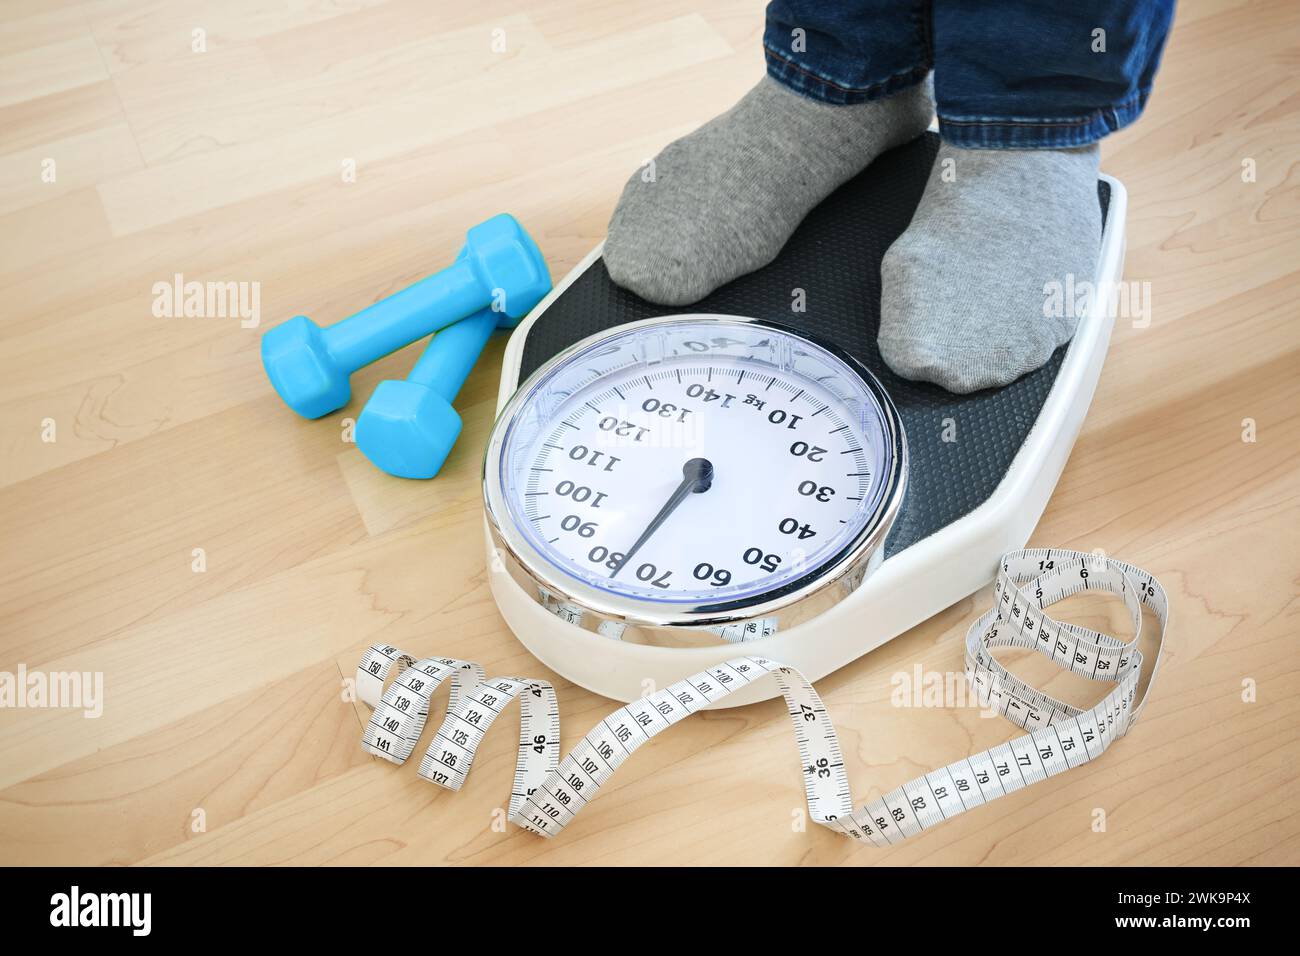 Feet of a man in gray socks standing on a scale to check the weight after fitness training, blue dumbbells and a measuring tape lying nearby on a wood Stock Photo